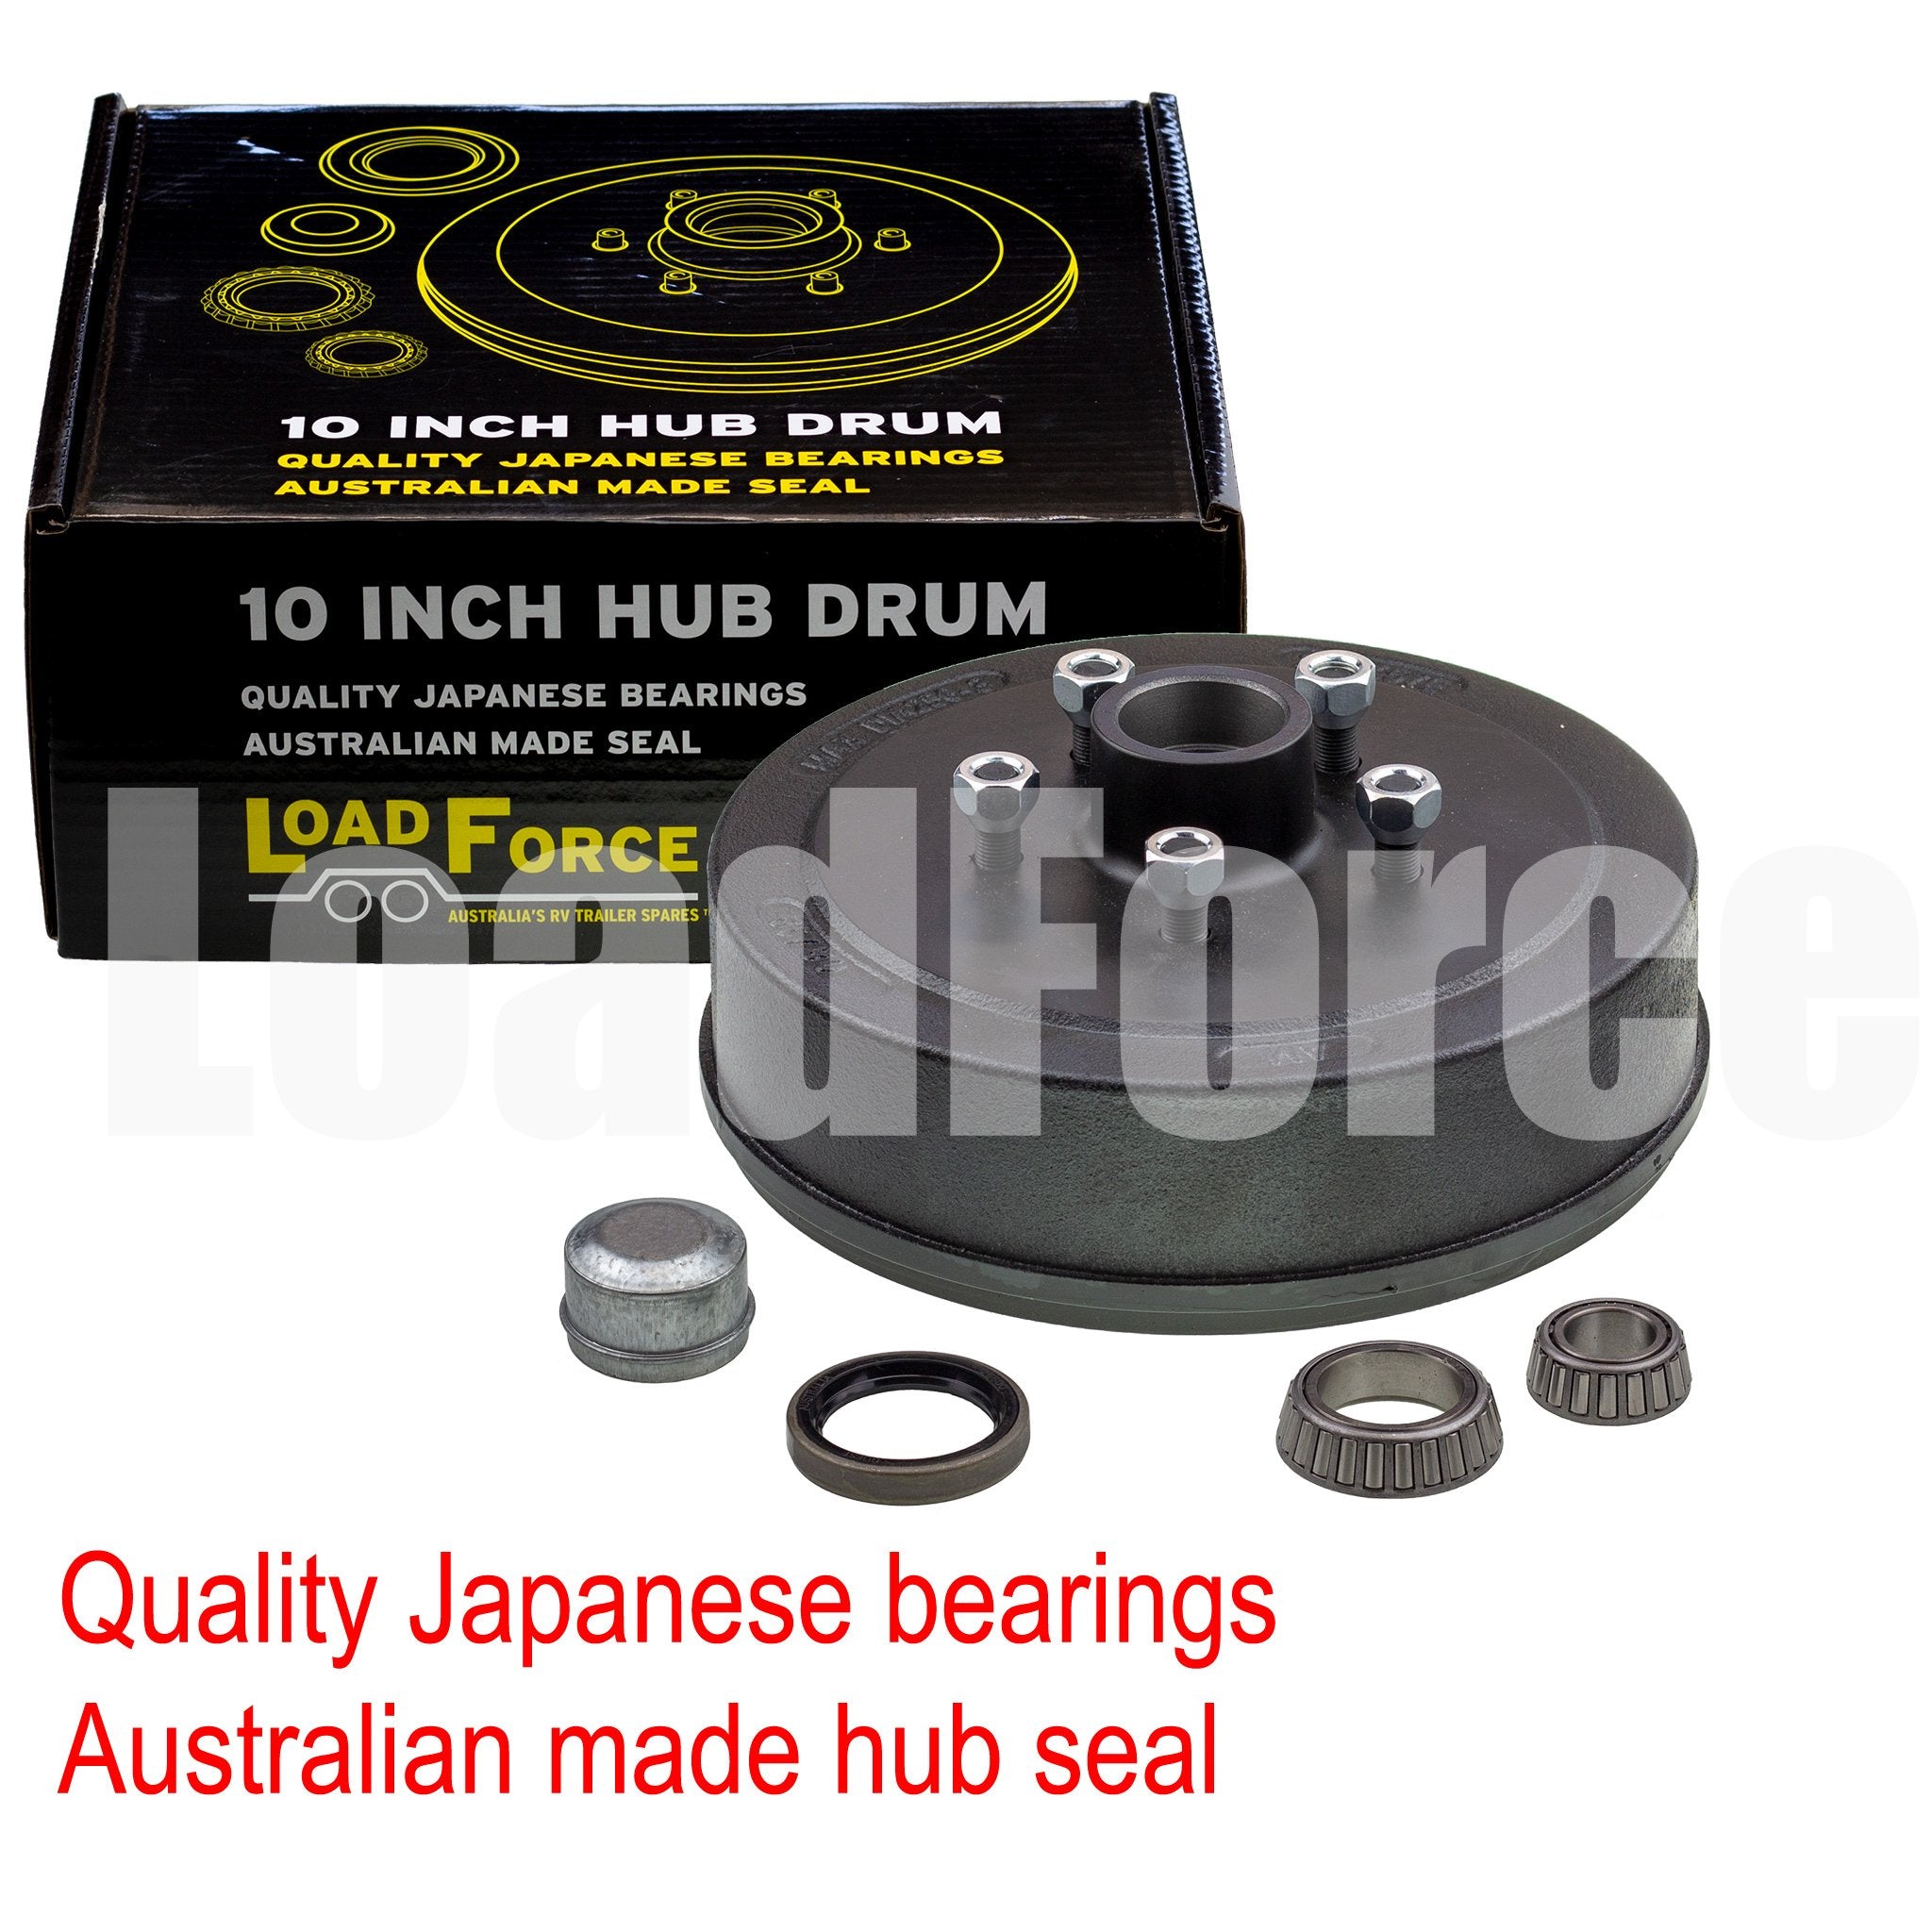 LoadForce Hub drum 10 x 2.25 inch Ford 5 stud with slimline (Ford) bearing